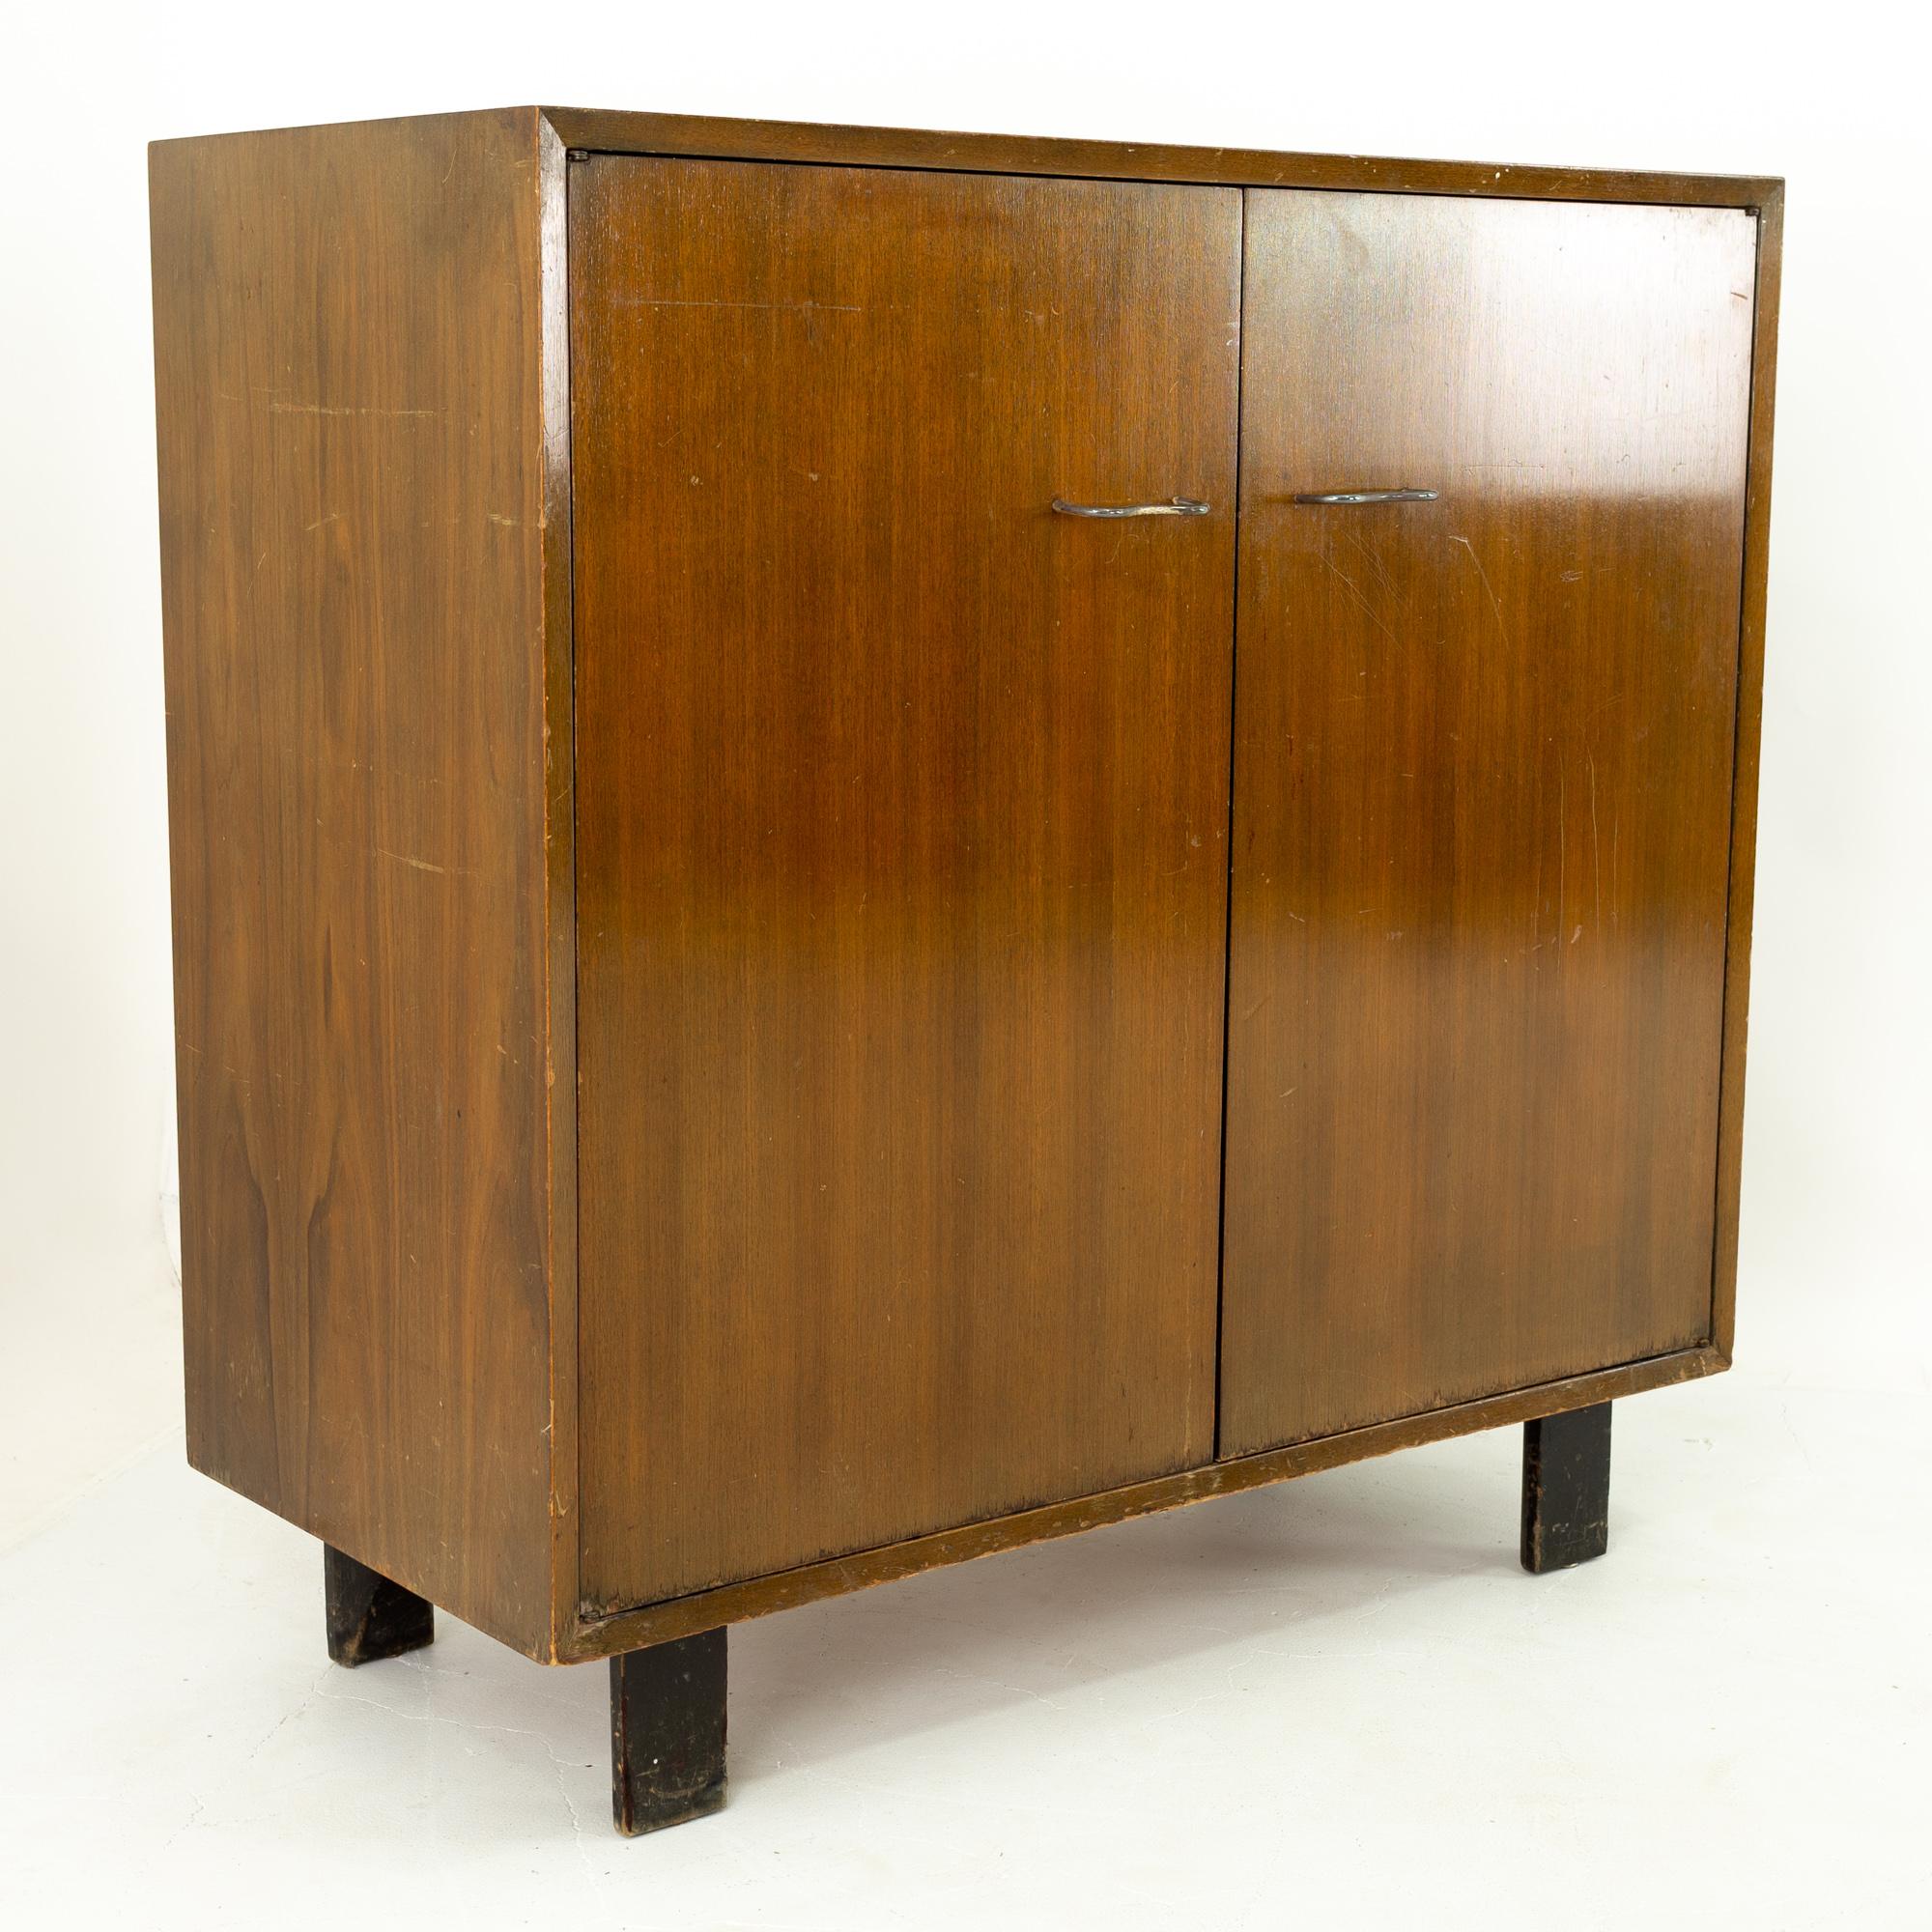 George Nelson for Herman Miller Mid Century two-door media cabinet
Measures: 40 wide x 18.5 deep x 39.5 high
See below for 5 ways to save!
Free restoration: When you purchase a piece we carefully clean and prepare it for shipping. If during